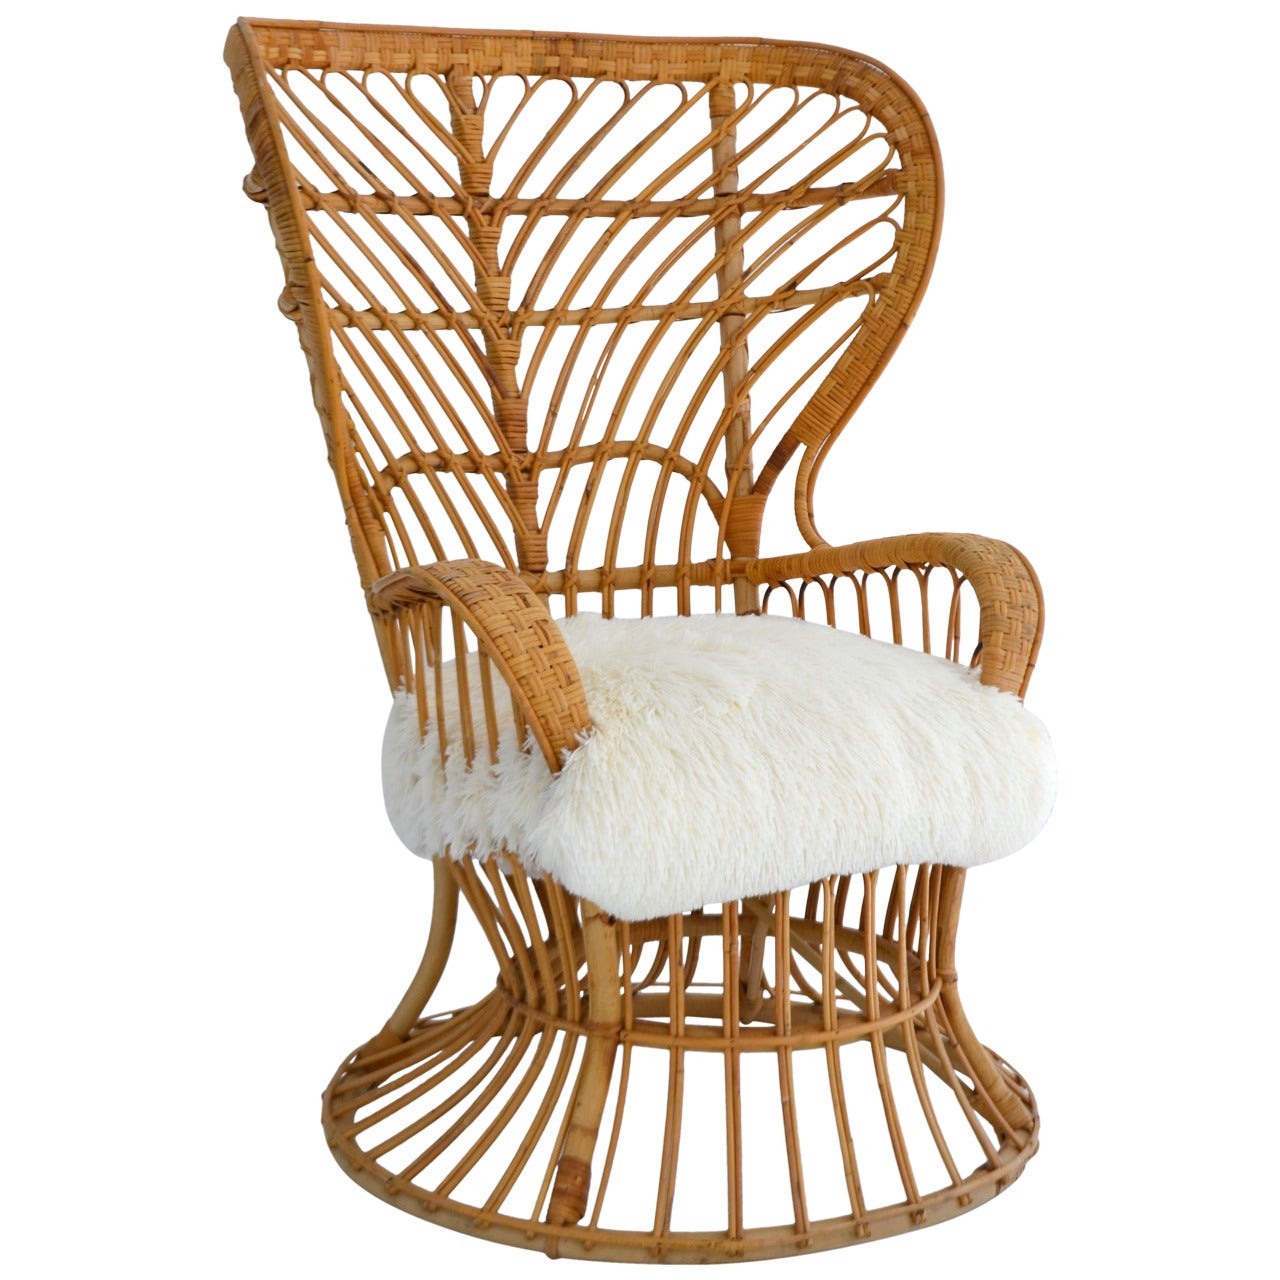 Woven Rattan and Bamboo Chair